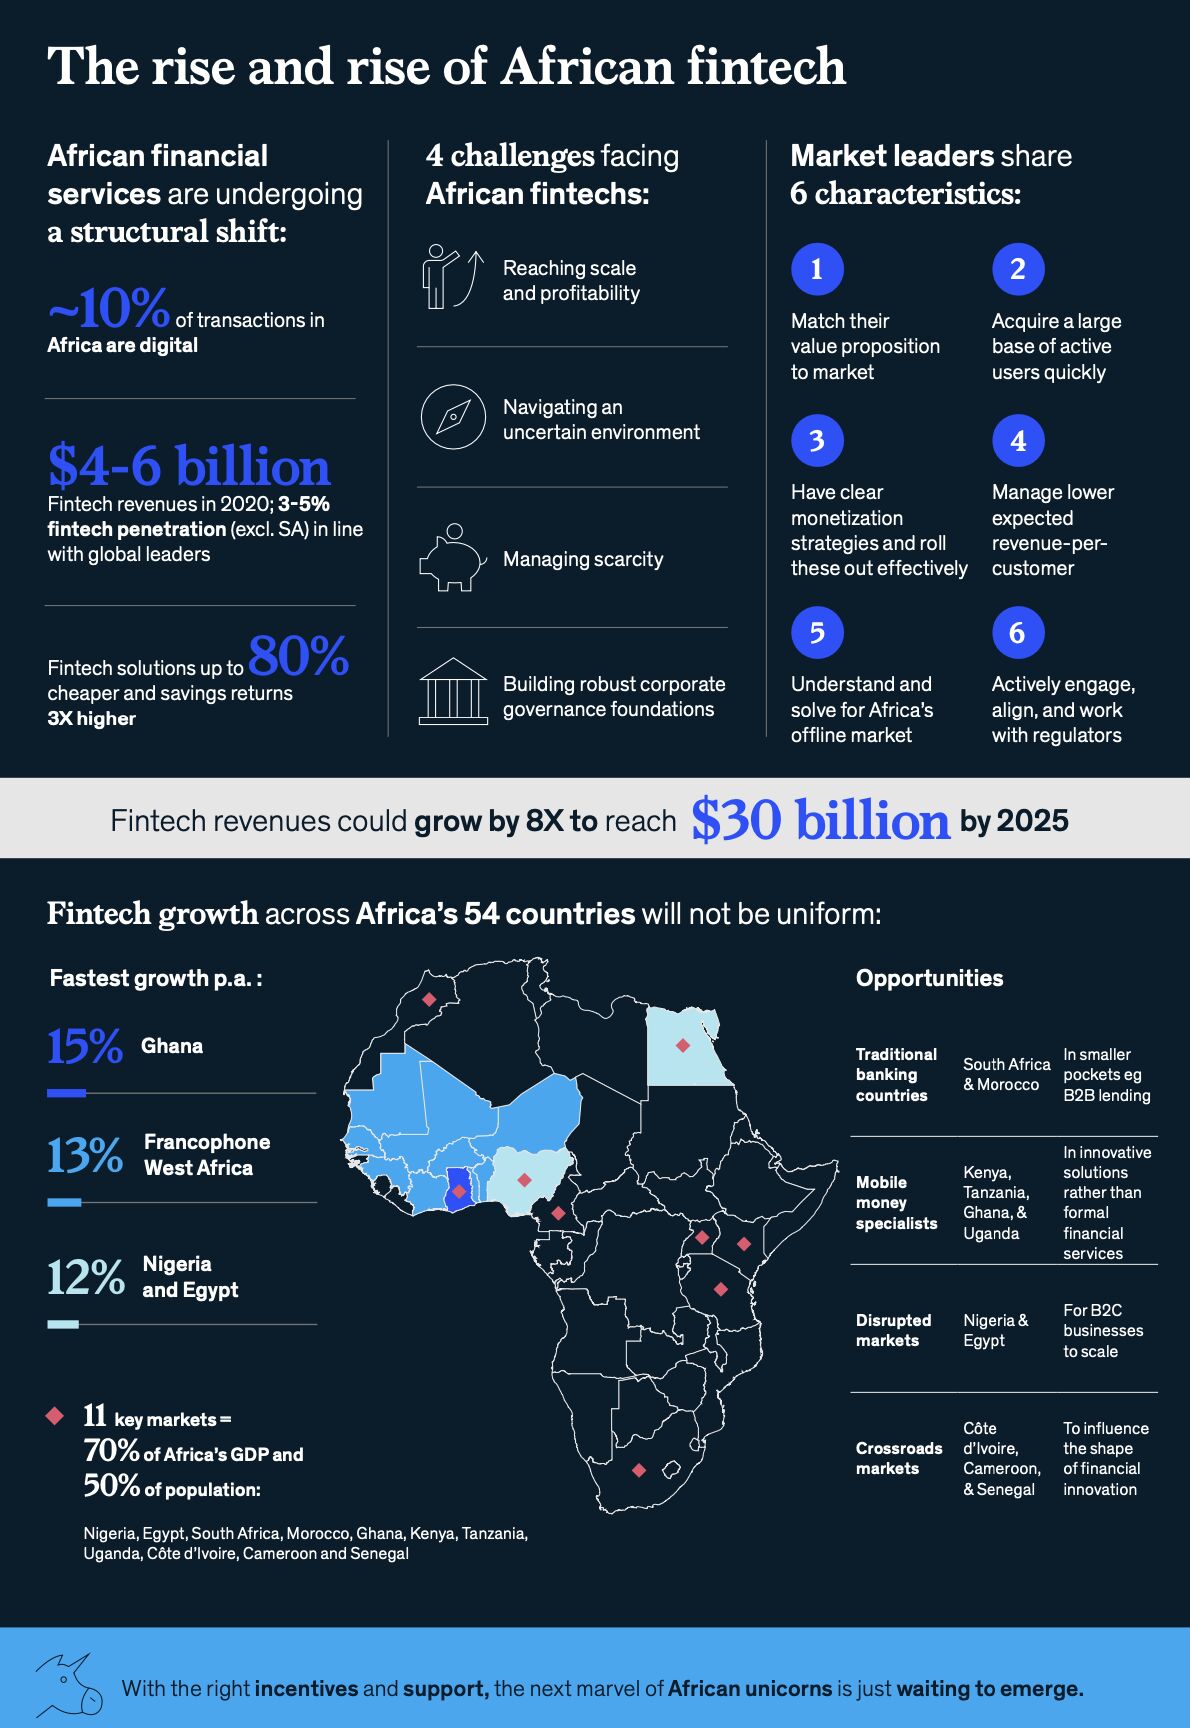 African Fintech: A Revolution Propelled by Digitalization and Demographics